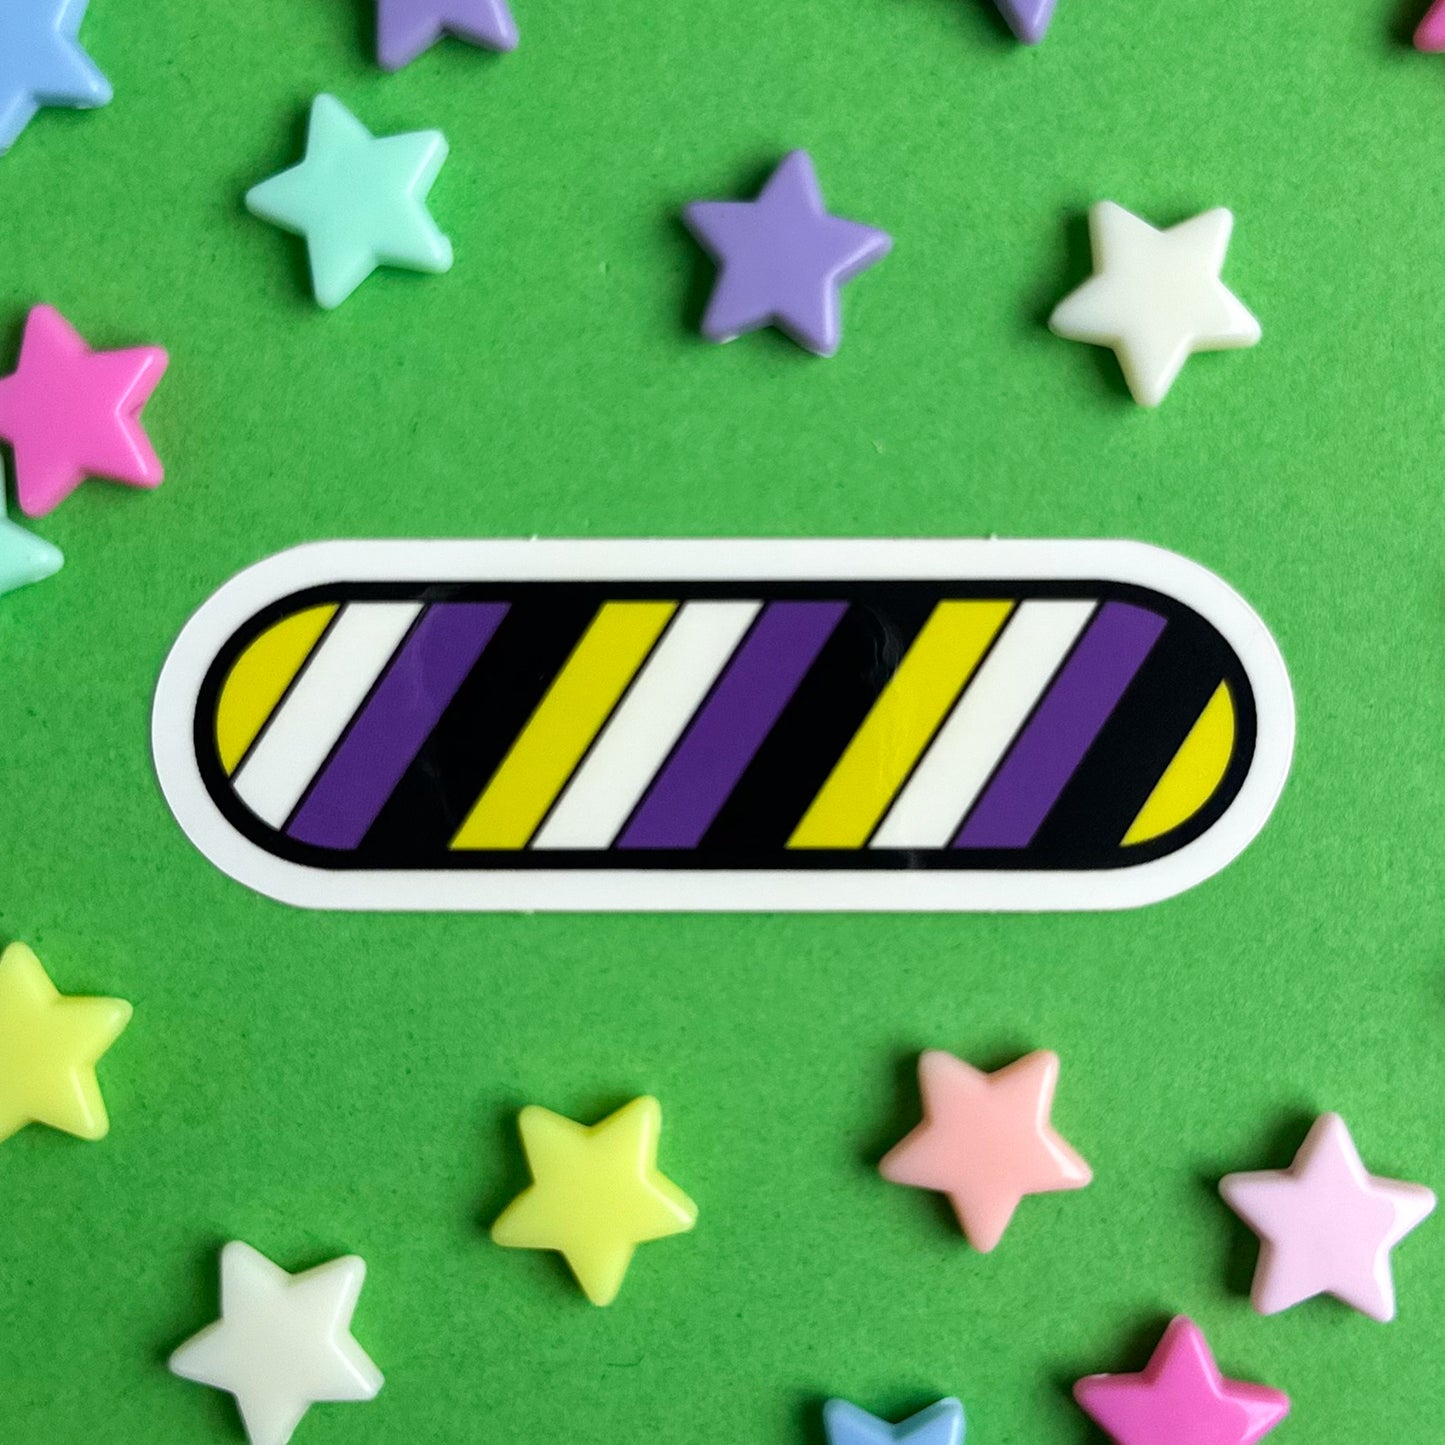 An oval shaped sticker with diagonal stripes of the Nonbinary Pride flag. The sticker is on a green background with pastel star beads around it.